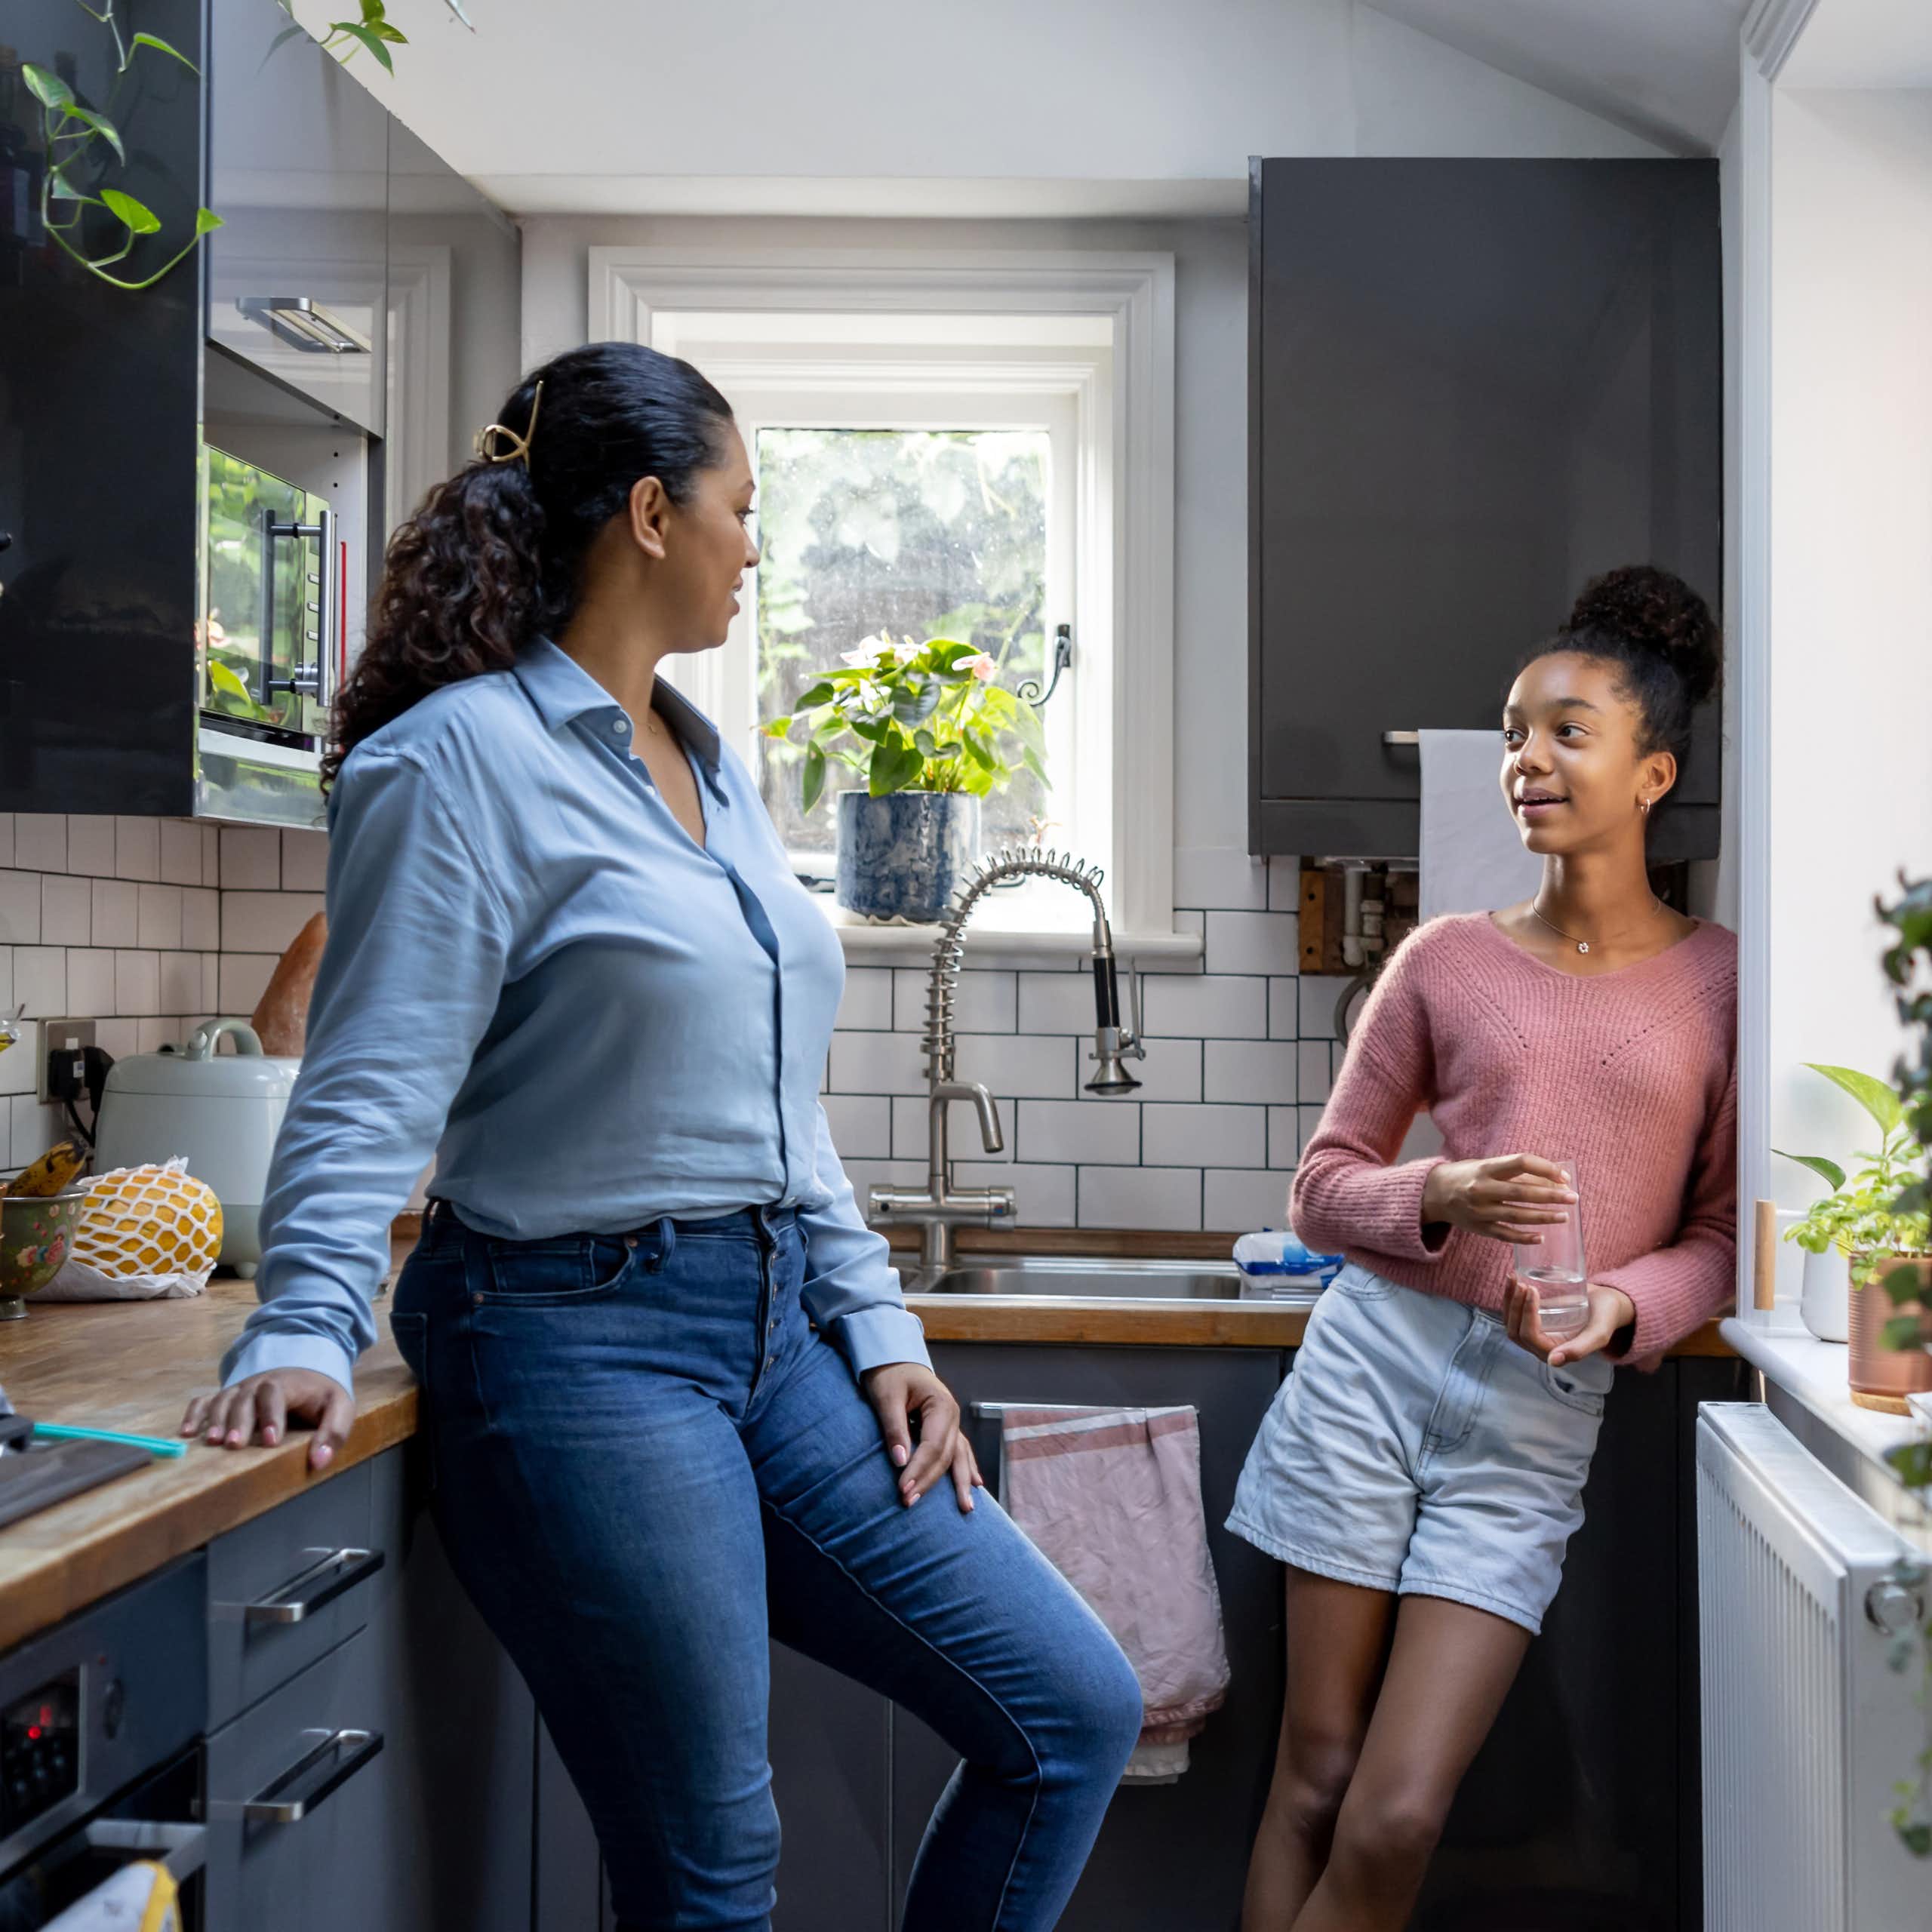 A mother and daughter talk and bond in their kitchen.